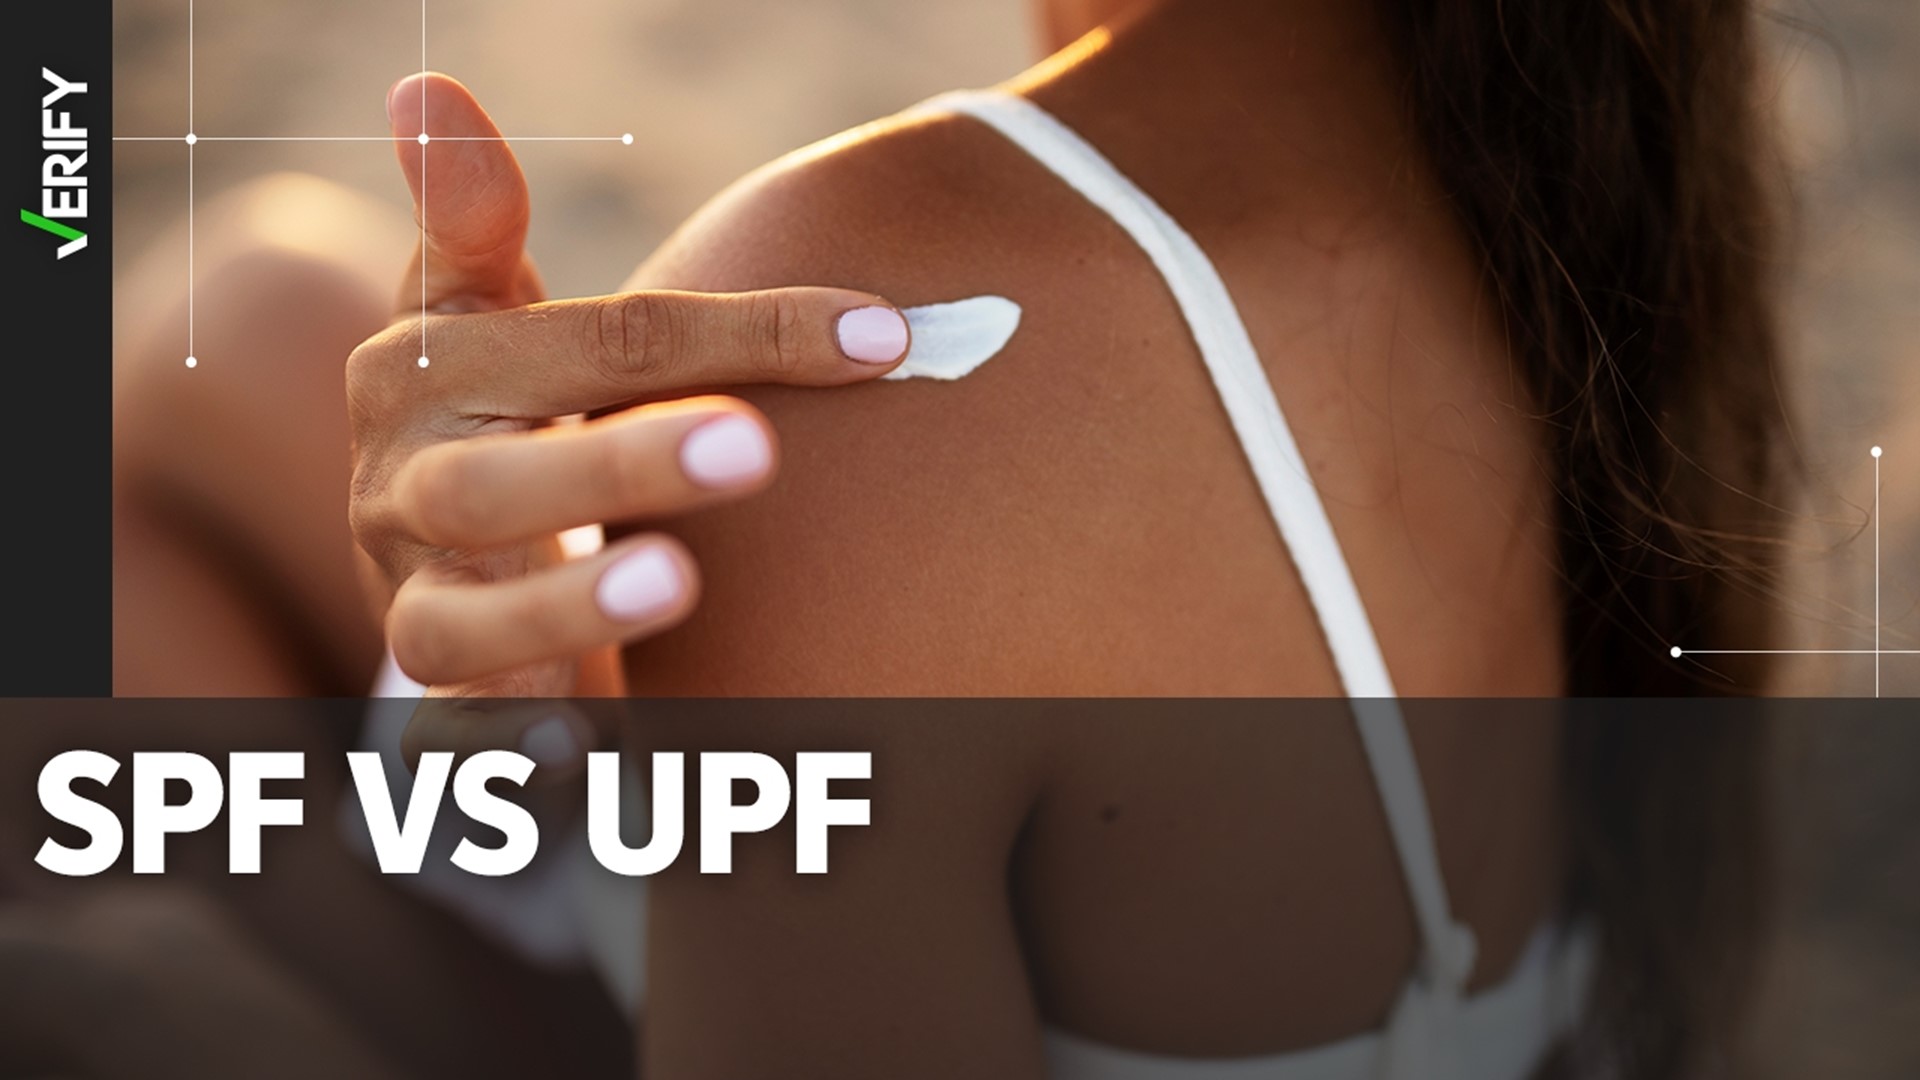 SPF is typically used to measure how long sunscreen protects you from the sun. UPF typically measures how much of the sun’s UV rays are blocked by clothing fabric.